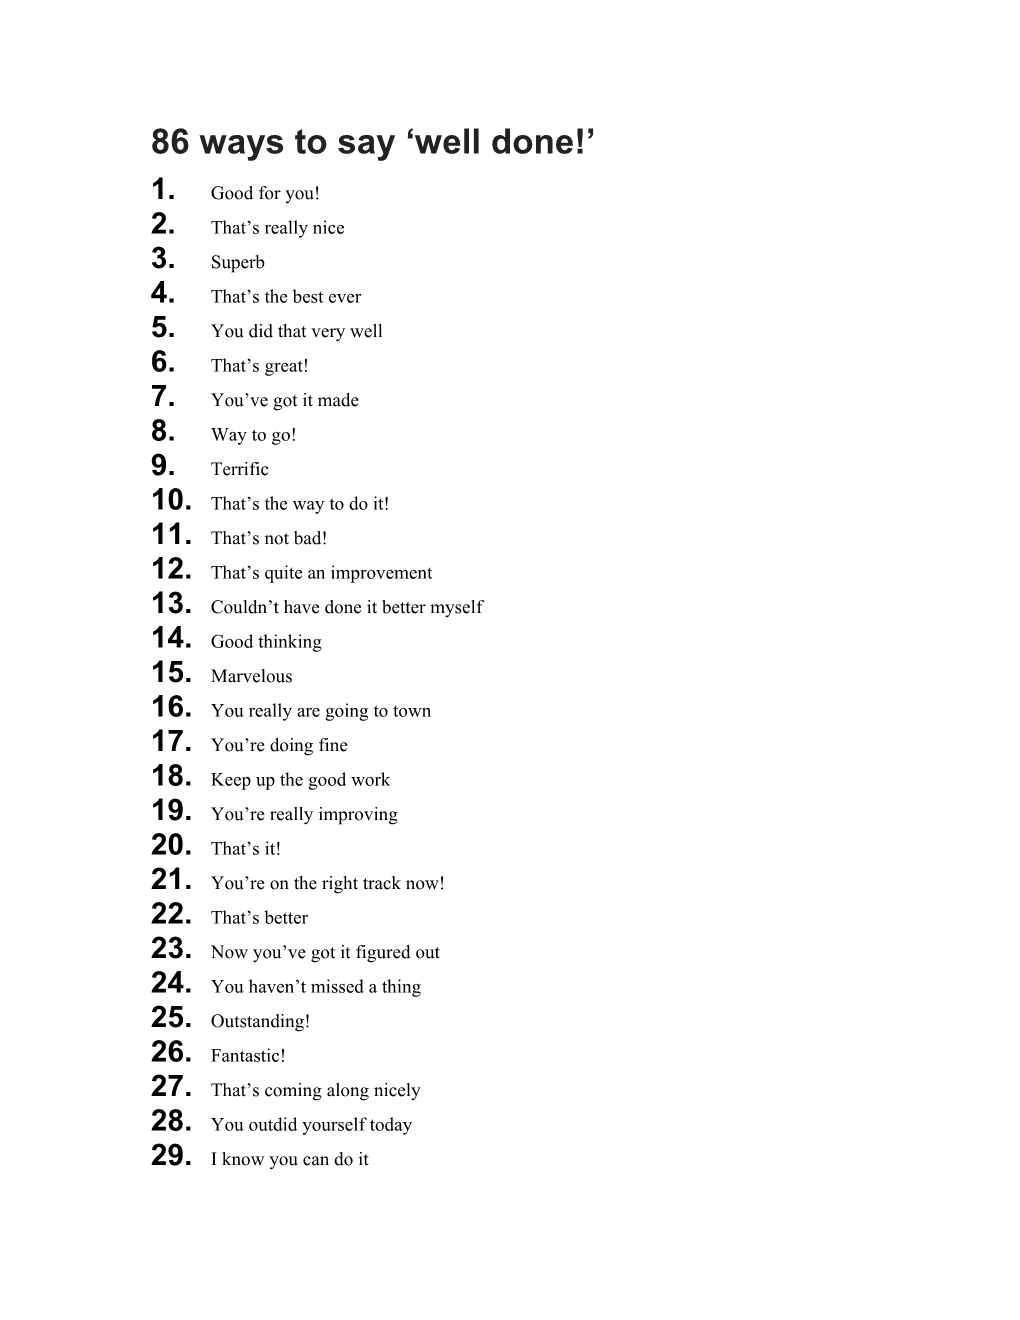 86 Ways to Say Well Done!